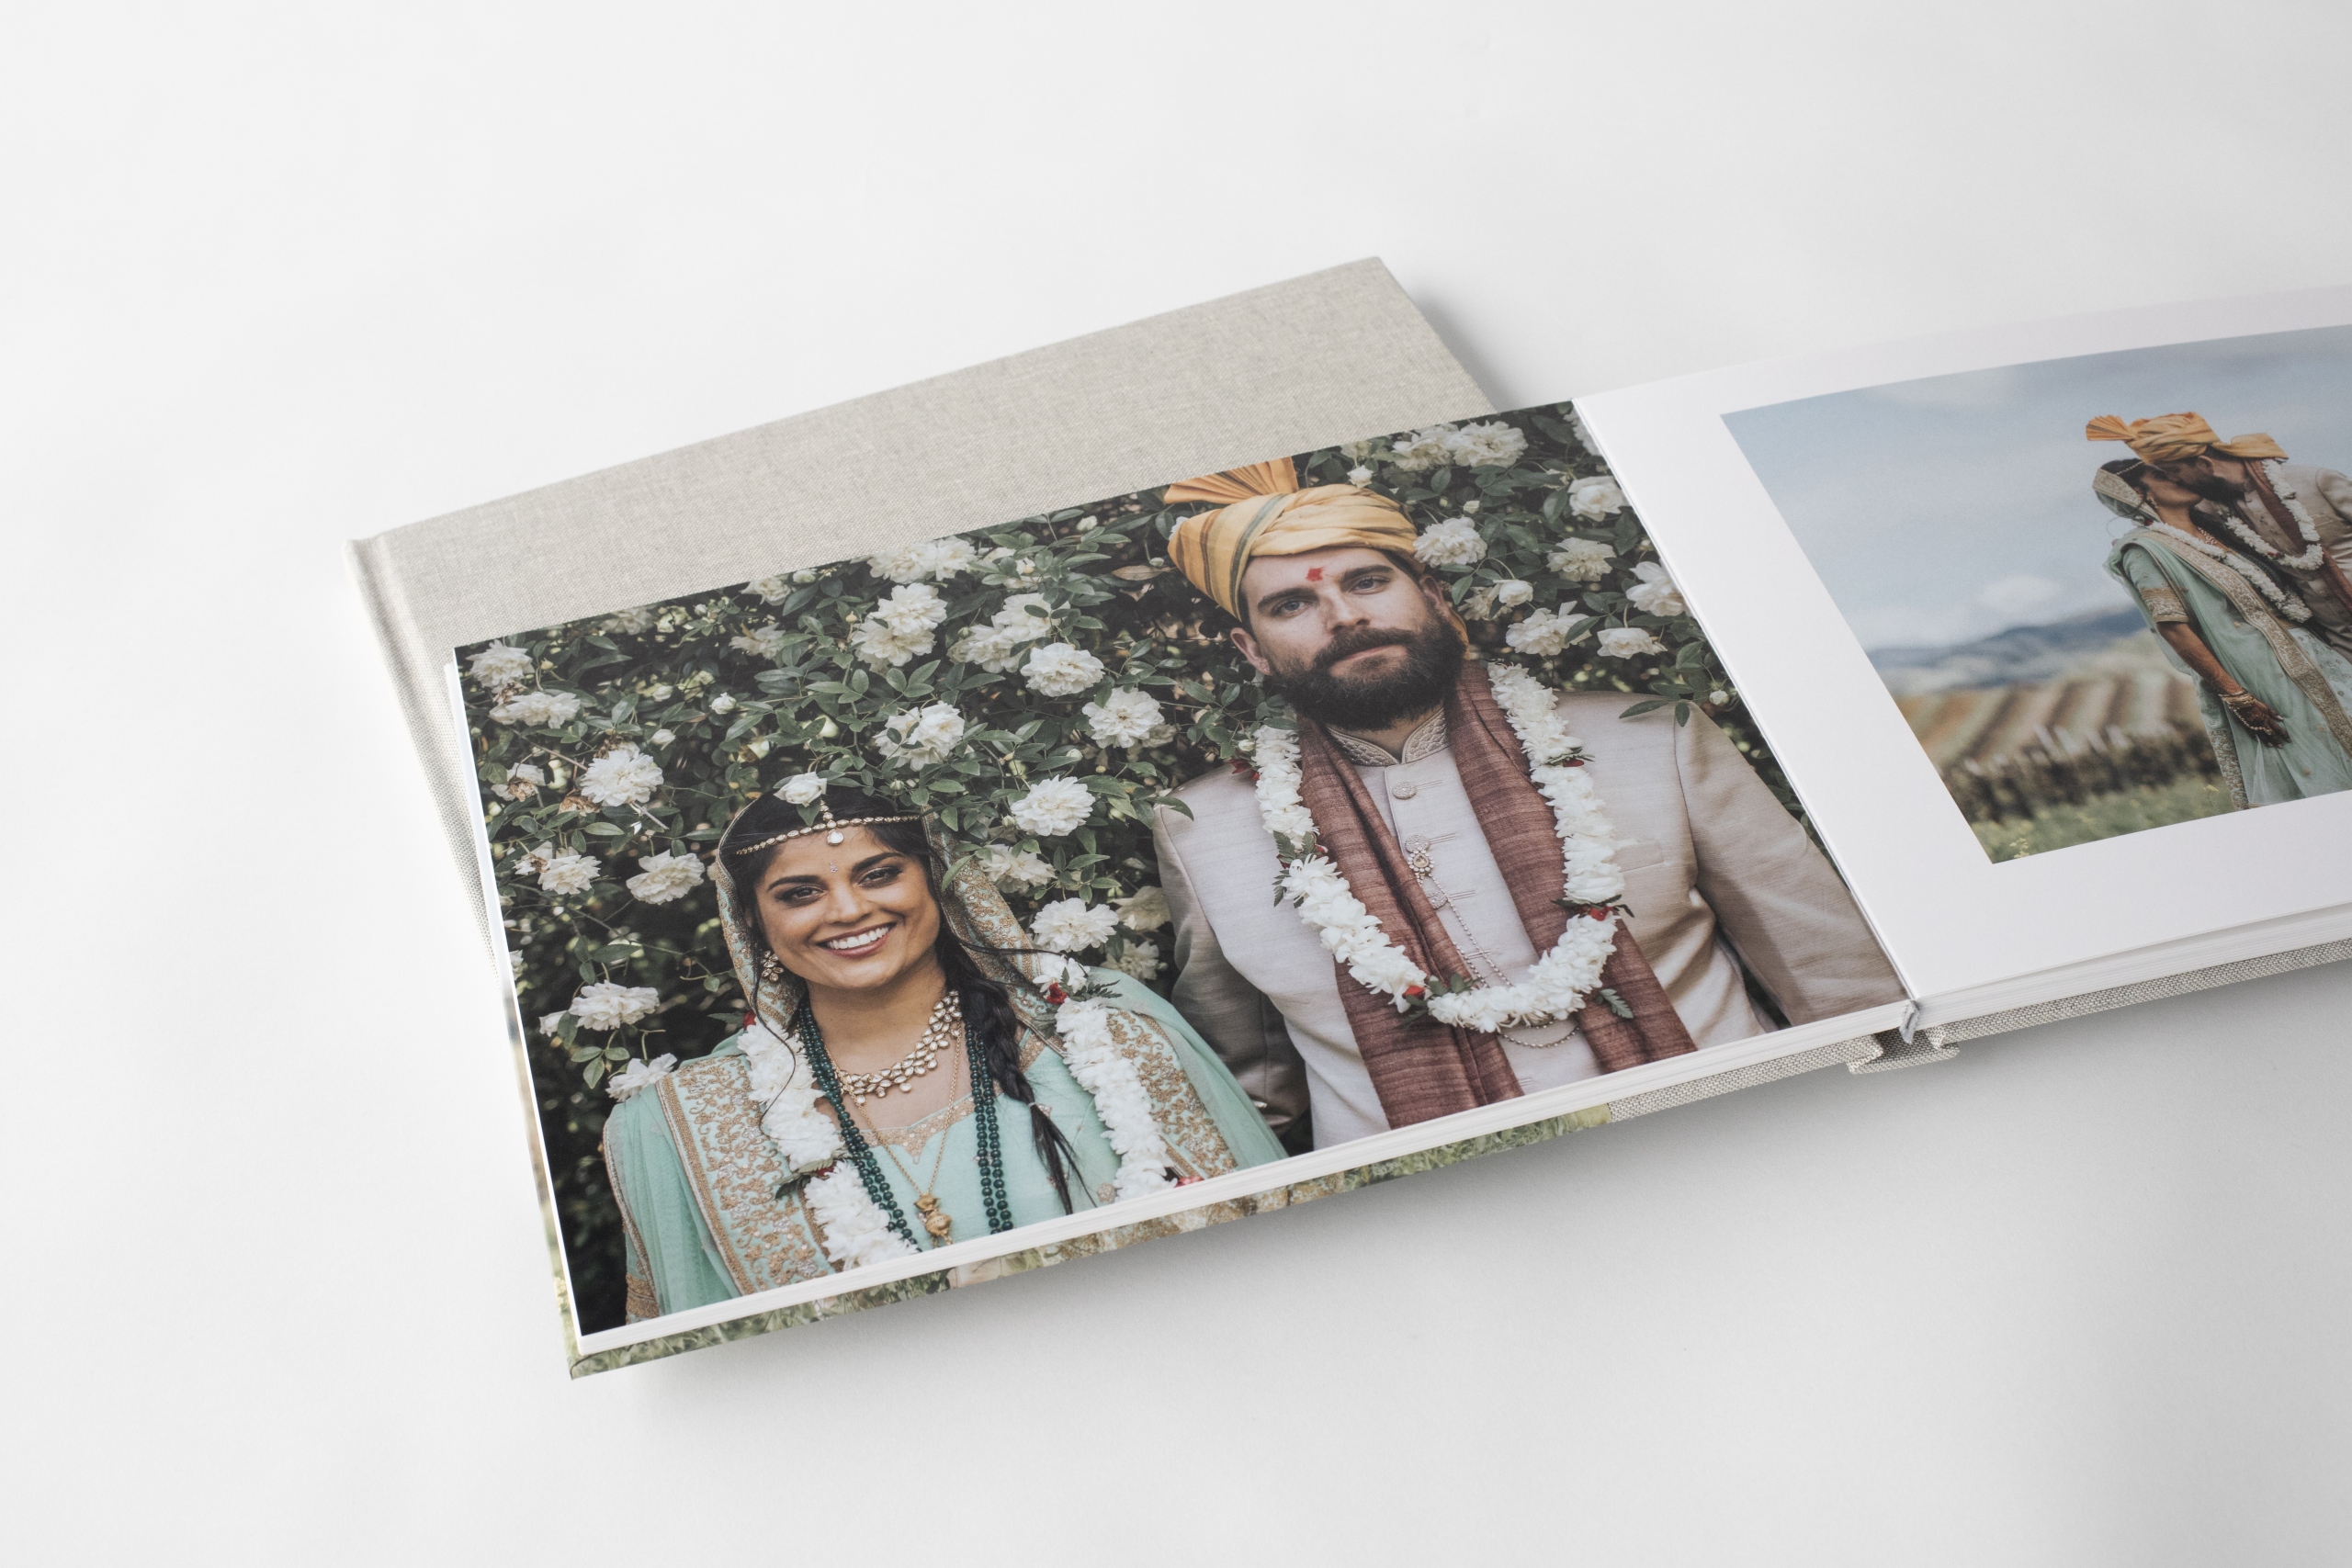 Wedding Photo Album or Special Occasion Memory Book, Personalized Album,  Custom Scrapbook, with Your Name on the Cover